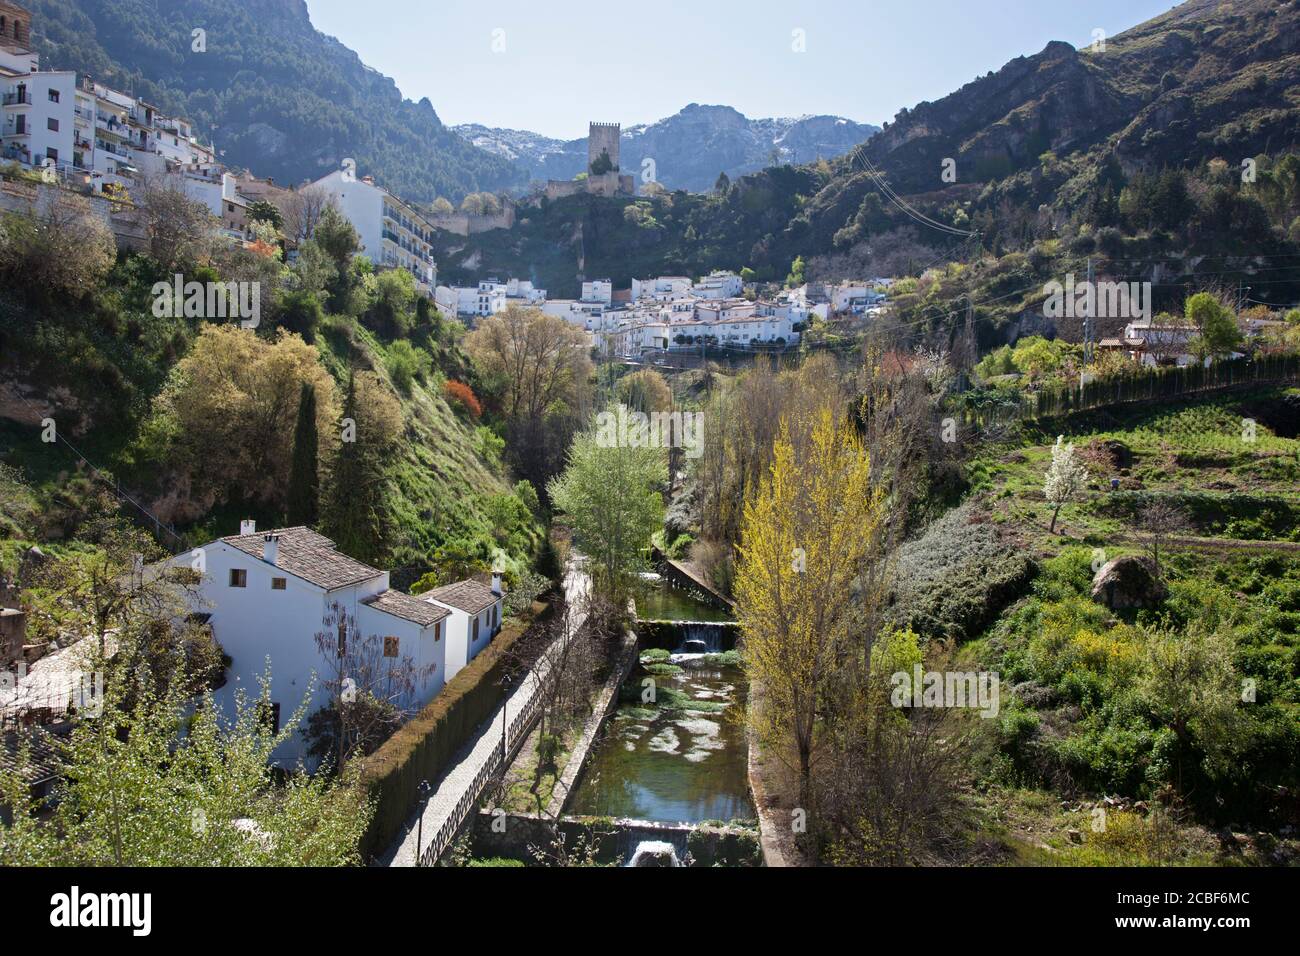 The old town of Cazorla and its' protective tower of La Yedra has a snowy mountains backdrop and overlooks the fertile Cerezuelo river valley below. Stock Photo